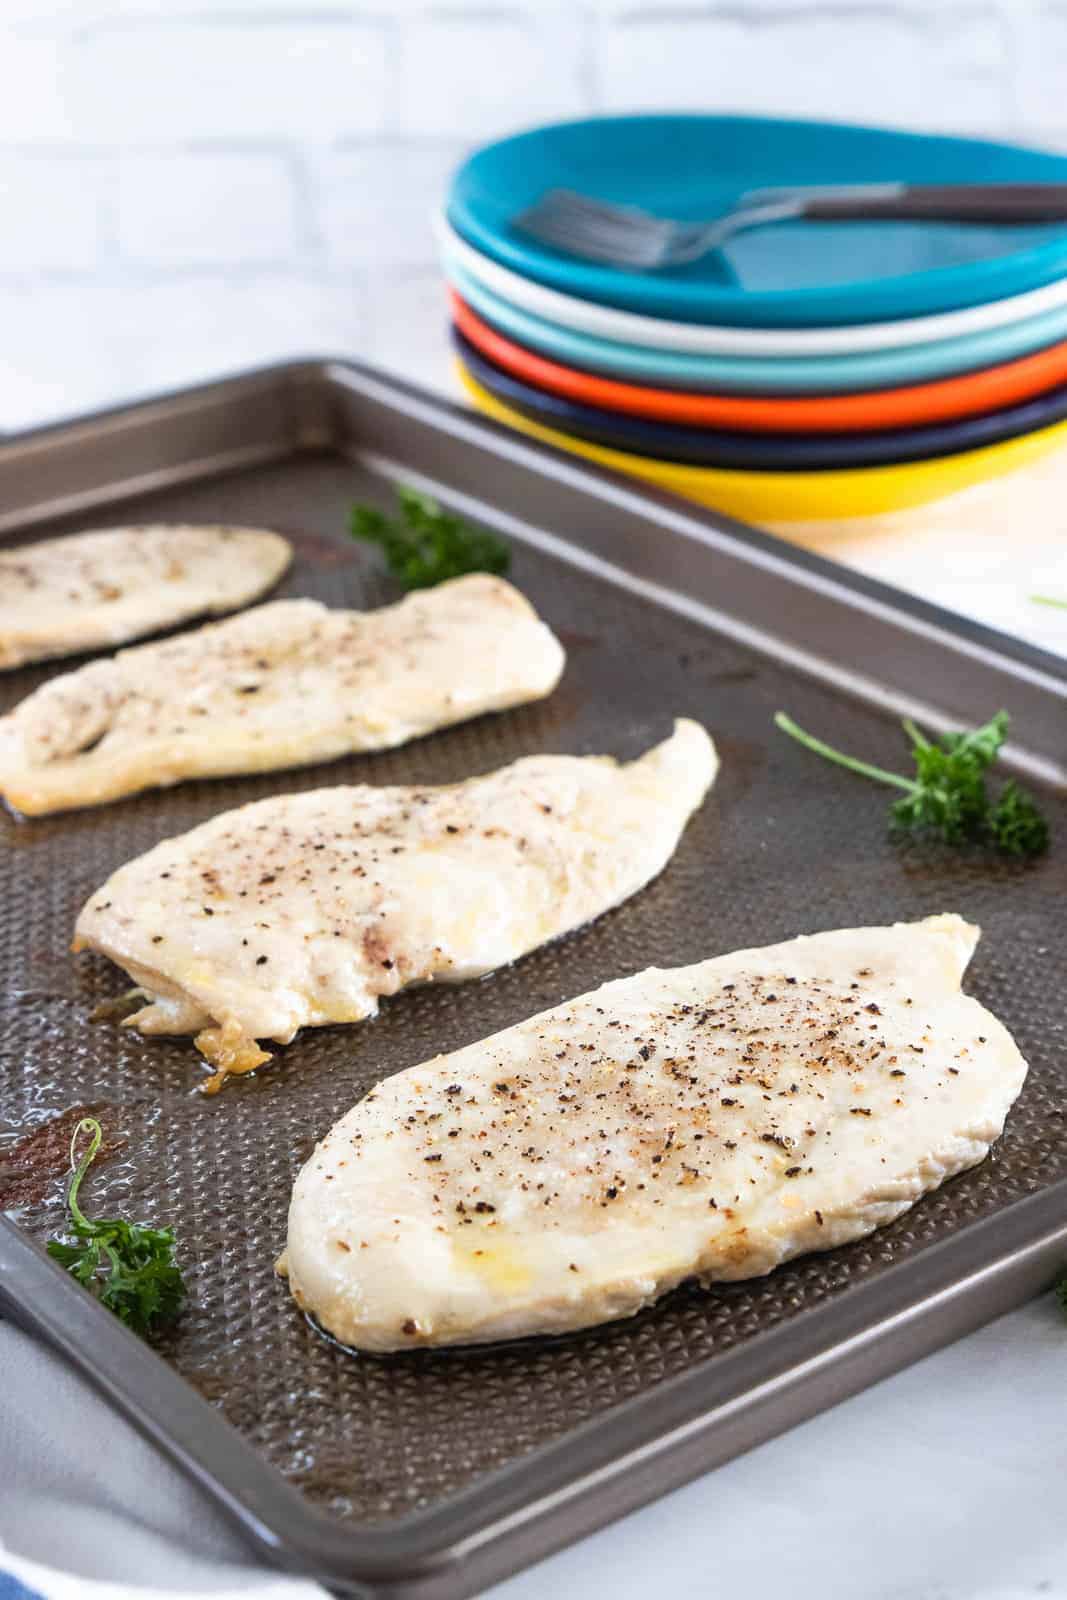 How to Bake Thin Sliced Chicken Breasts